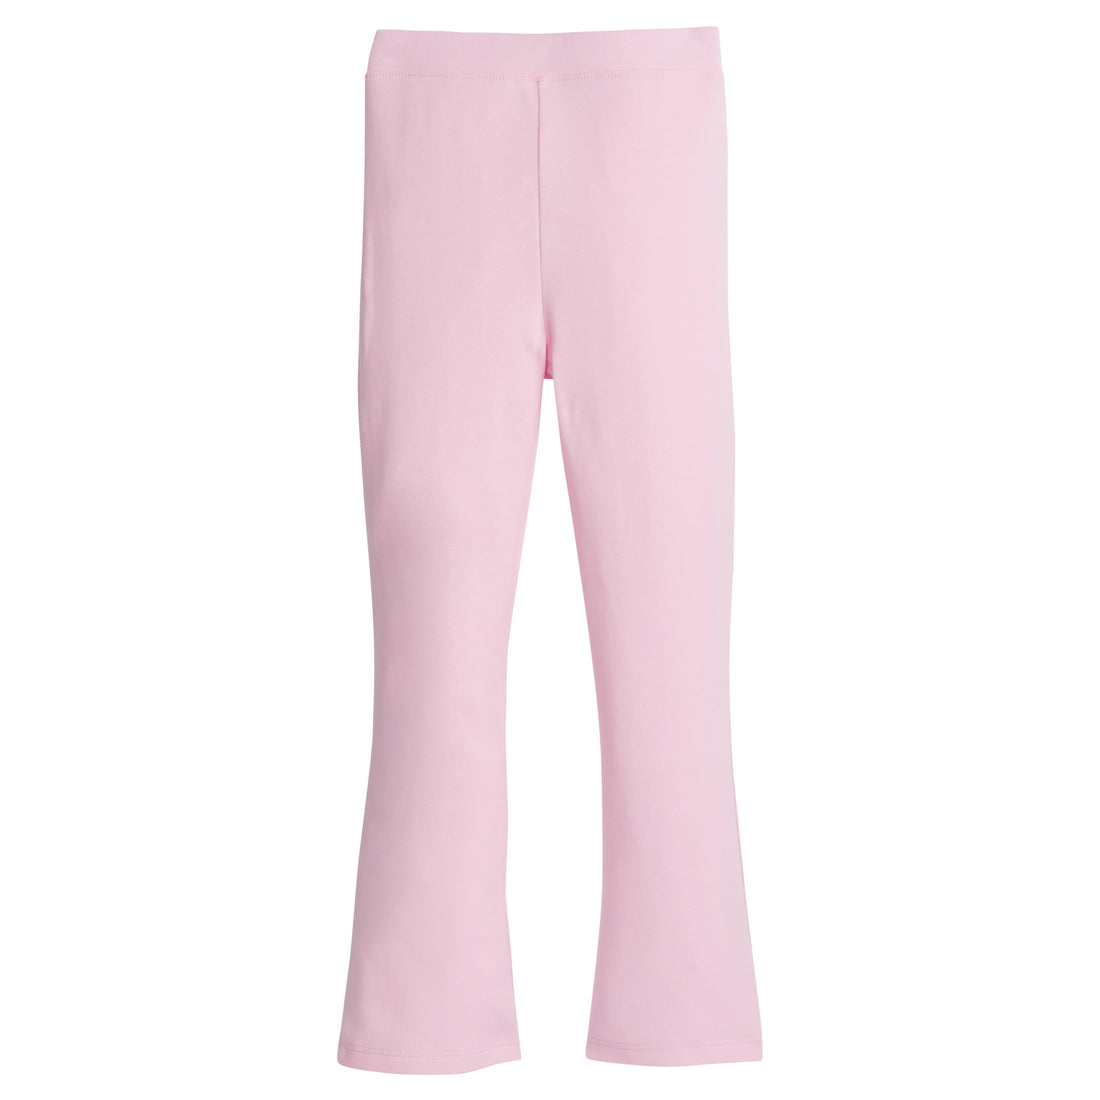 hot pink flared leggings for Sale,Up To OFF 74%